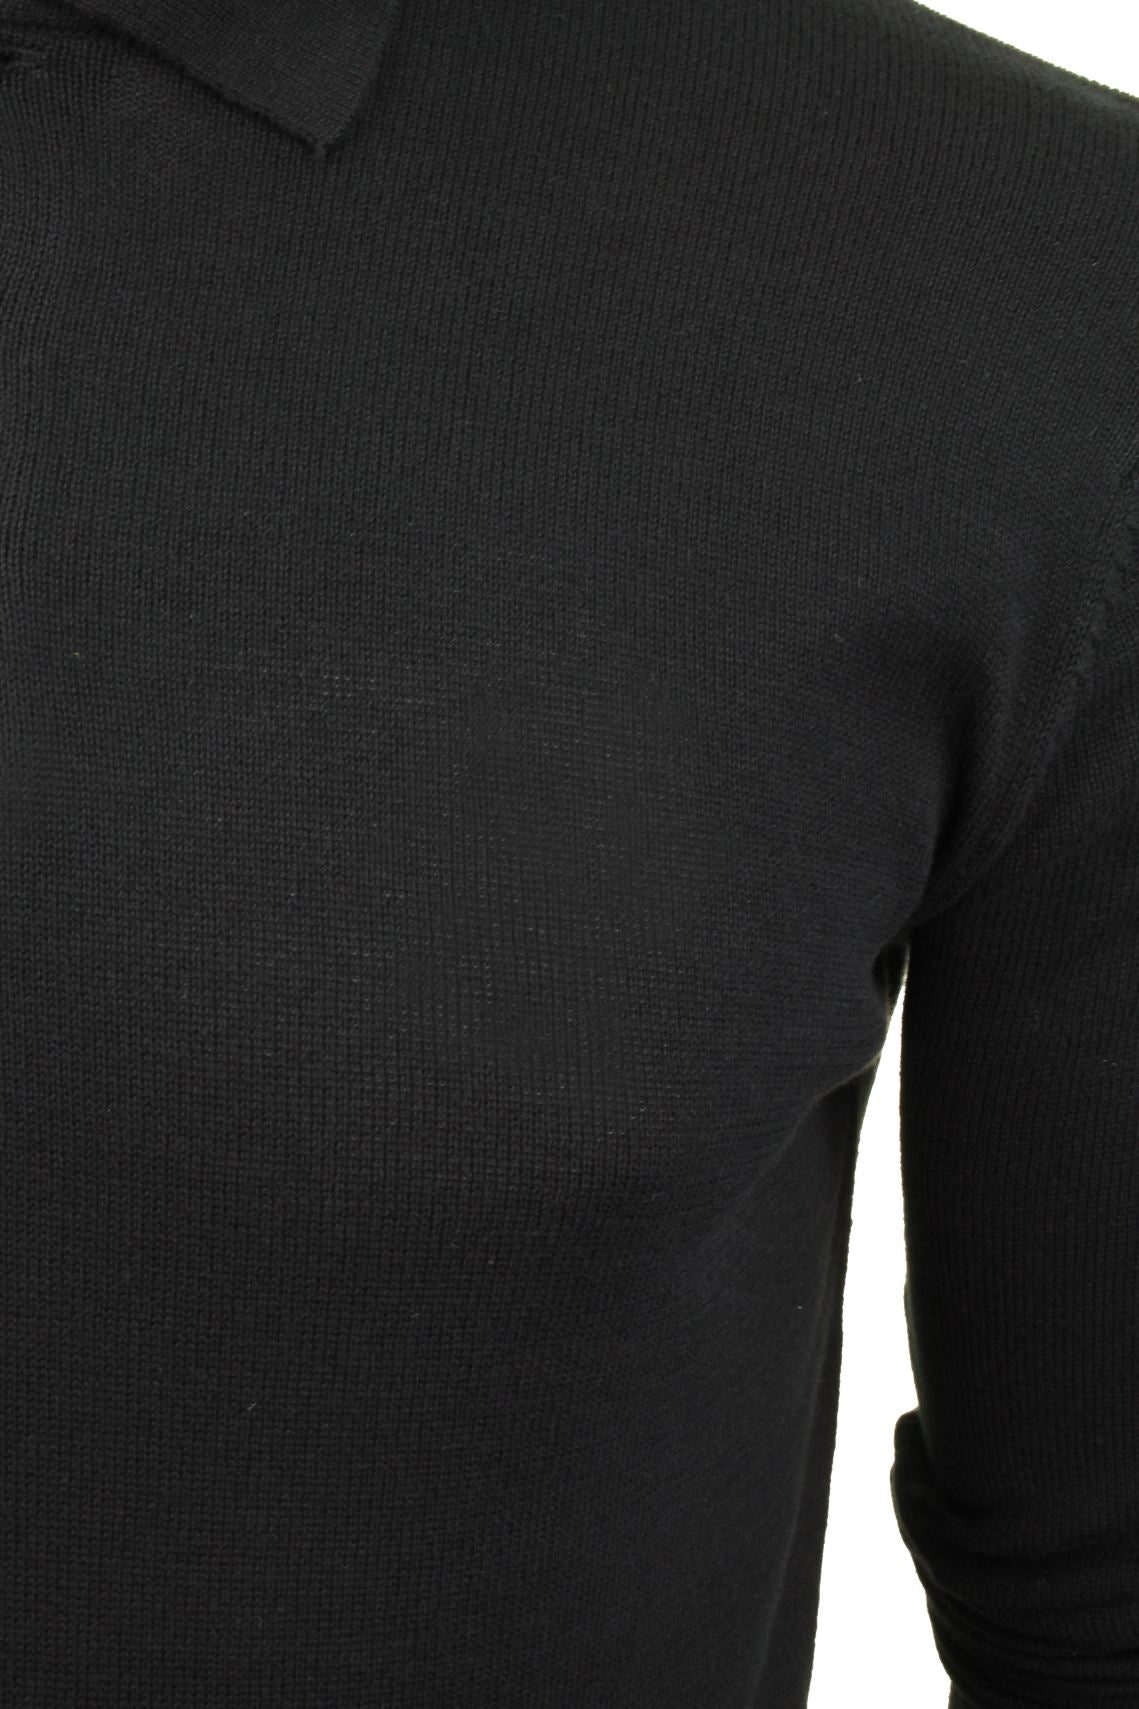 Mens Knitted Polo Shirt by Brave Soul Long Sleeved, 02, Mk-181Placket, Jet Black